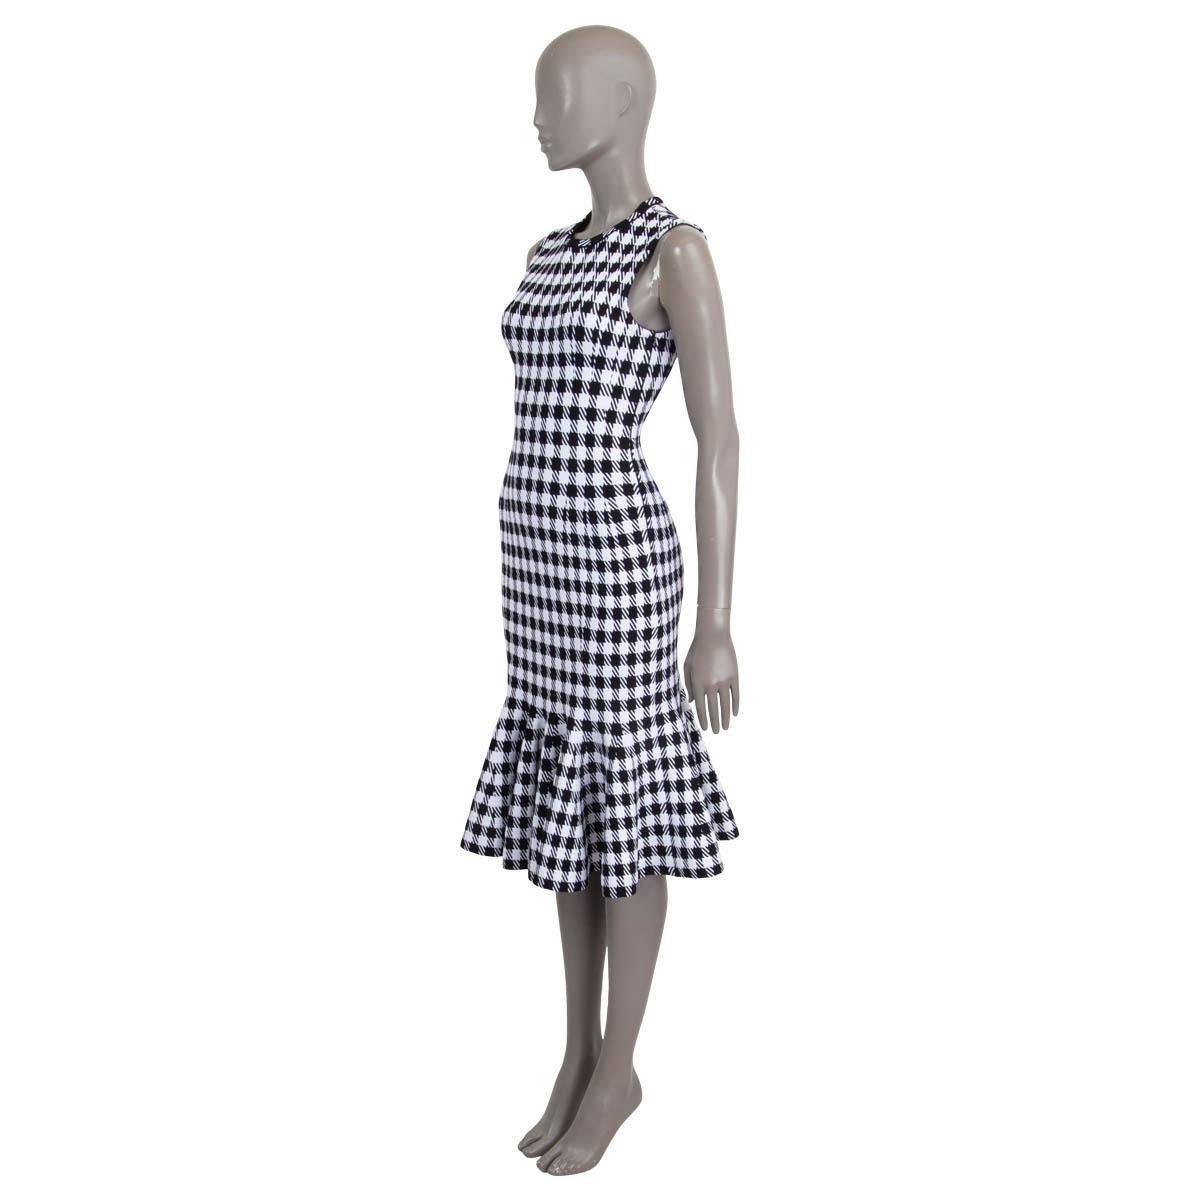 100% authentic Alaia houndstooth mermaid midi dress in black and white viscose (44%), polyamide (43%), polyester (9%) and elastane (4%). Features a ruffled trim and opens with a concealed zipper at the side. Unlined. Has been worn once and is in